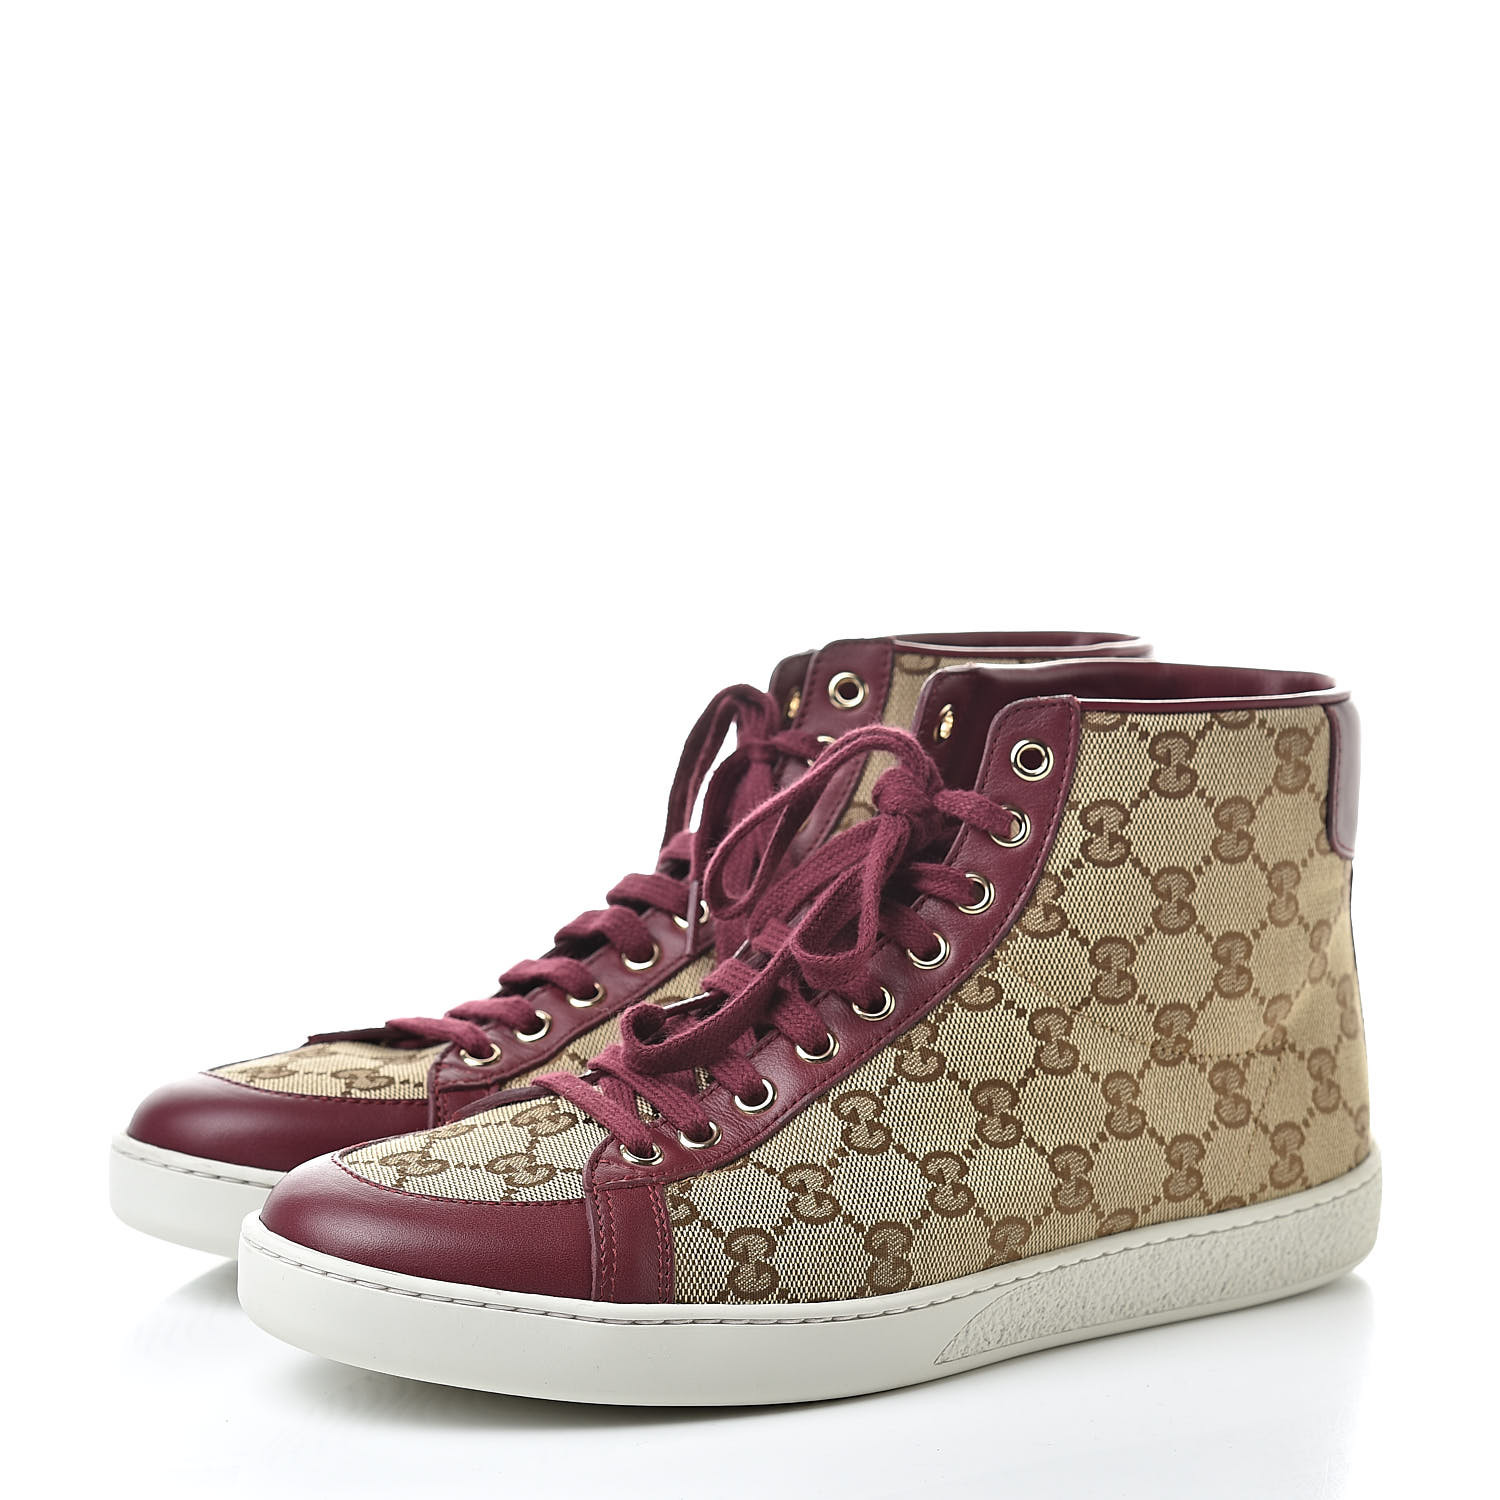 GUCCI Monogram Womens High Top Sneakers 39.5 Ruby 517281